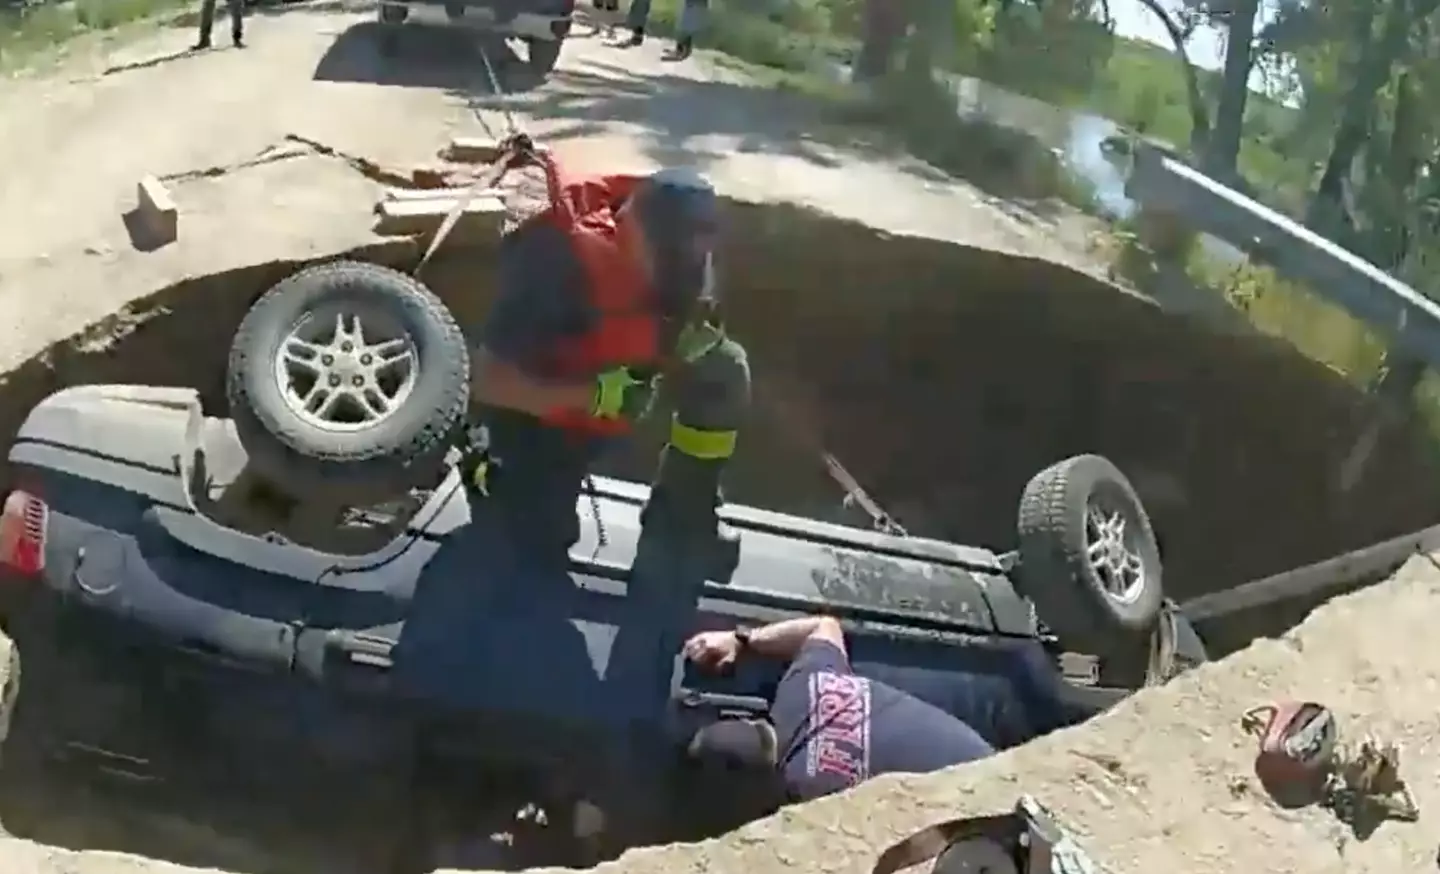 The car was stuck upside down in a sinkhole.